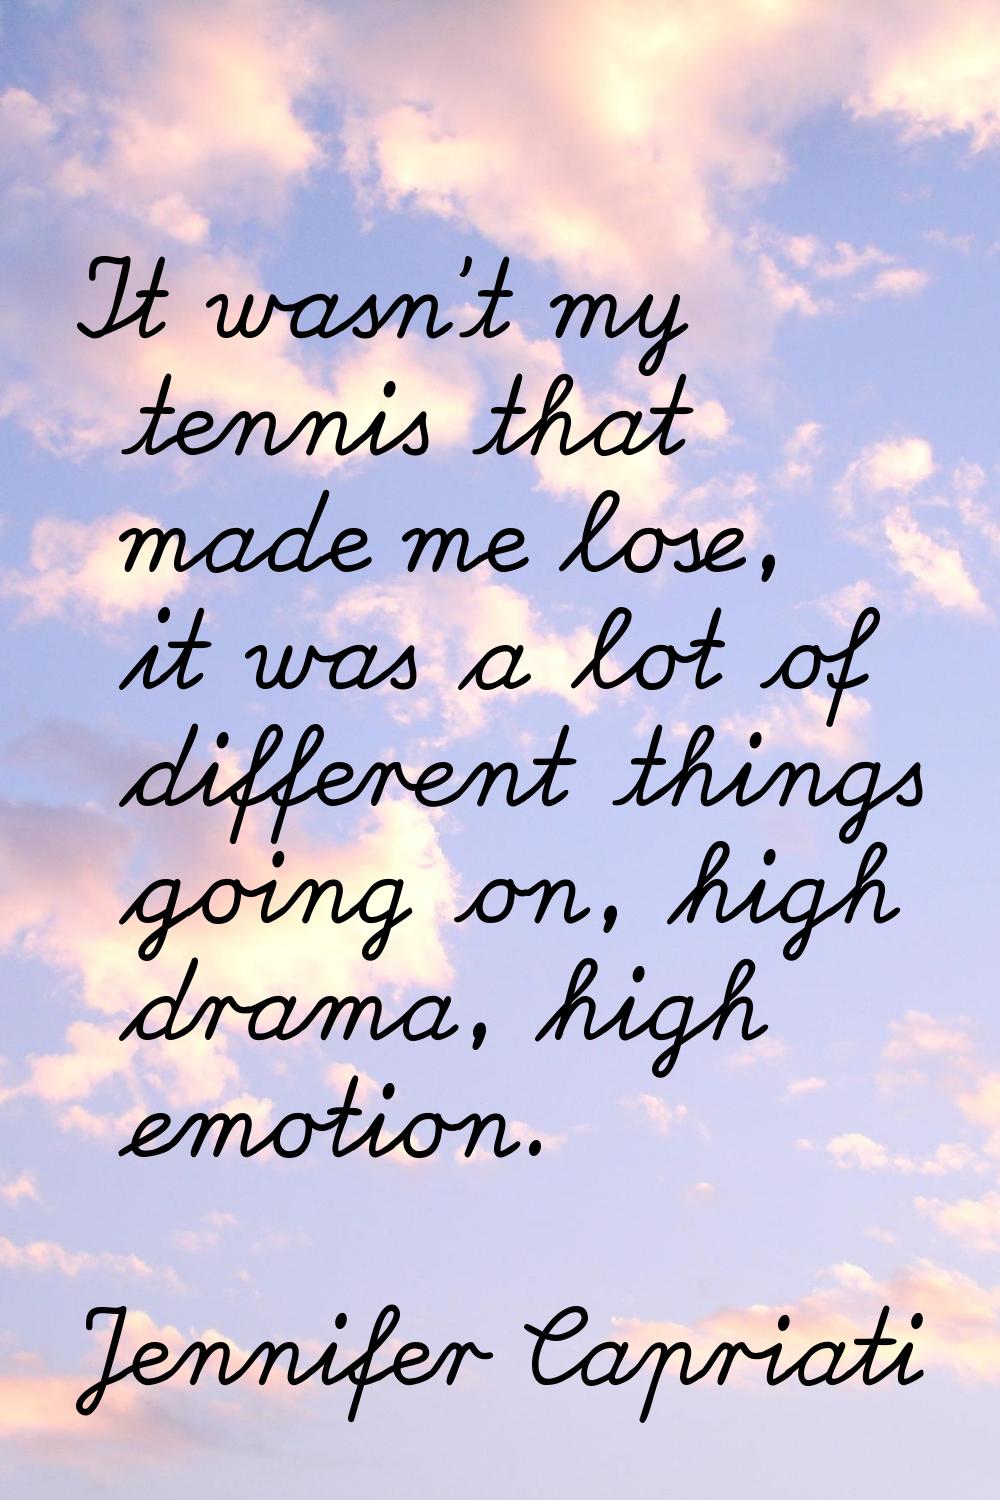 It wasn't my tennis that made me lose, it was a lot of different things going on, high drama, high 